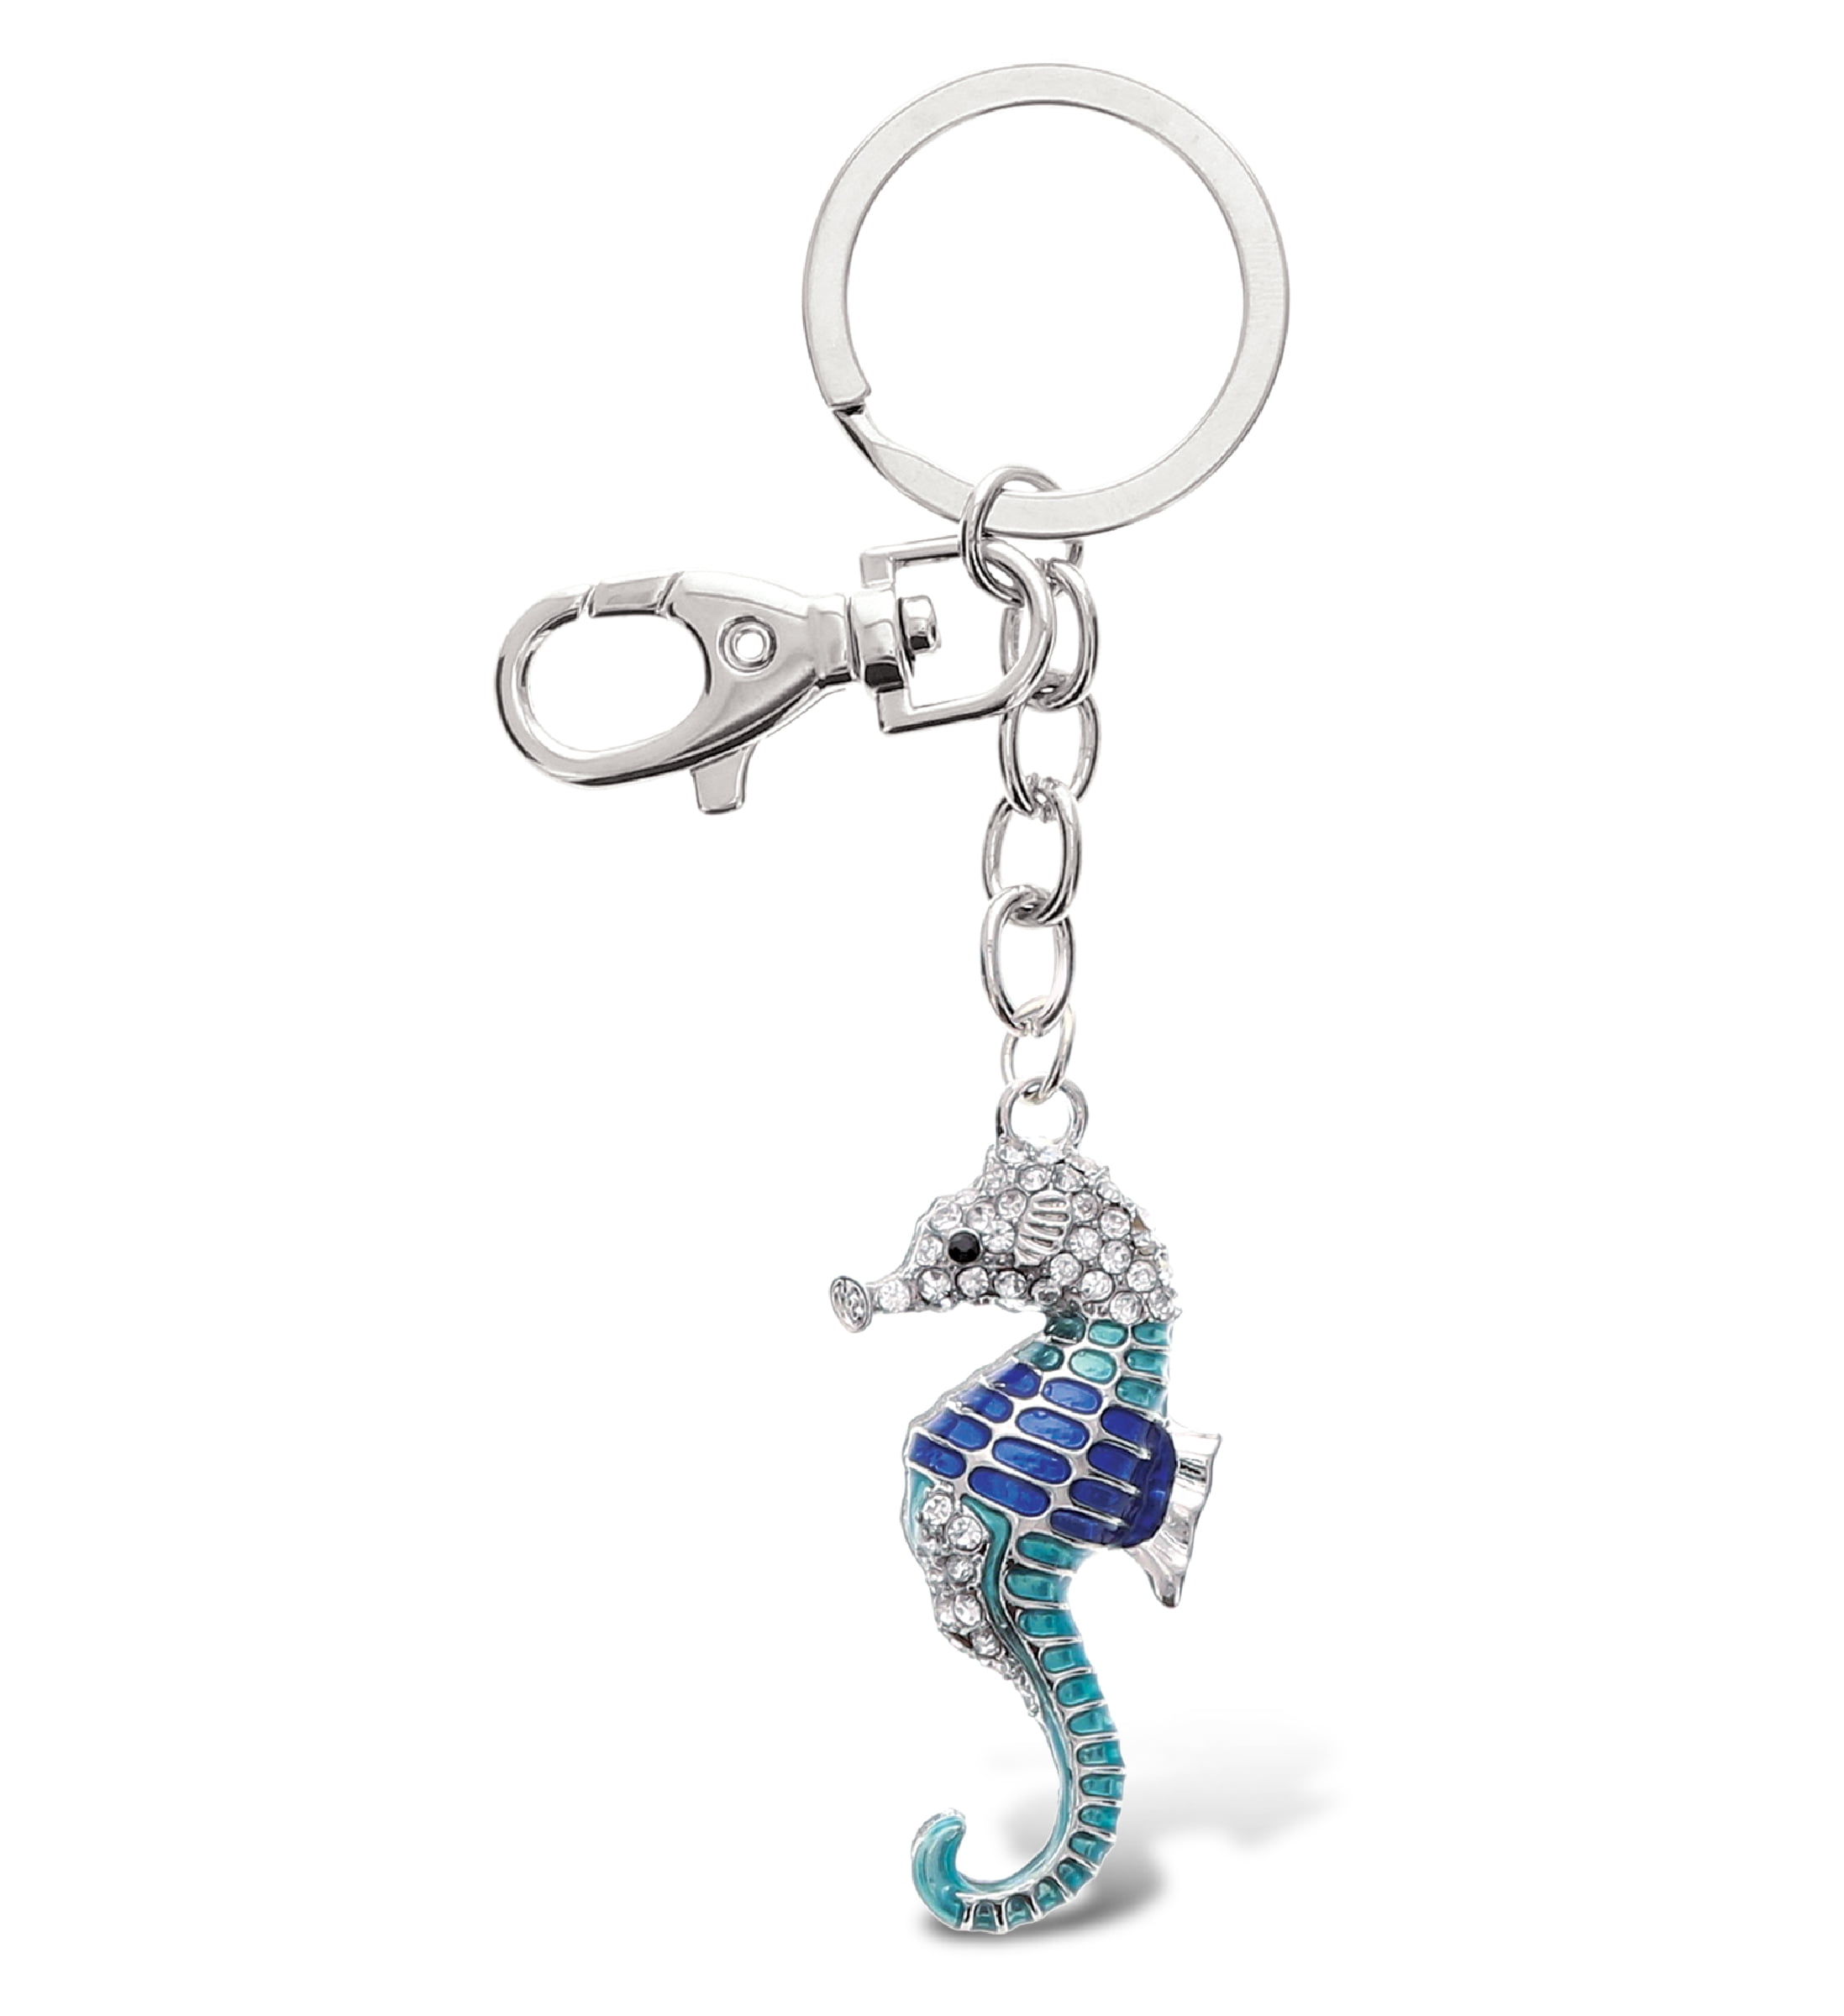 Sparkly Sea Horse Pendant Key Chain Ring w/ Lobster Clasp Collectable Blue 